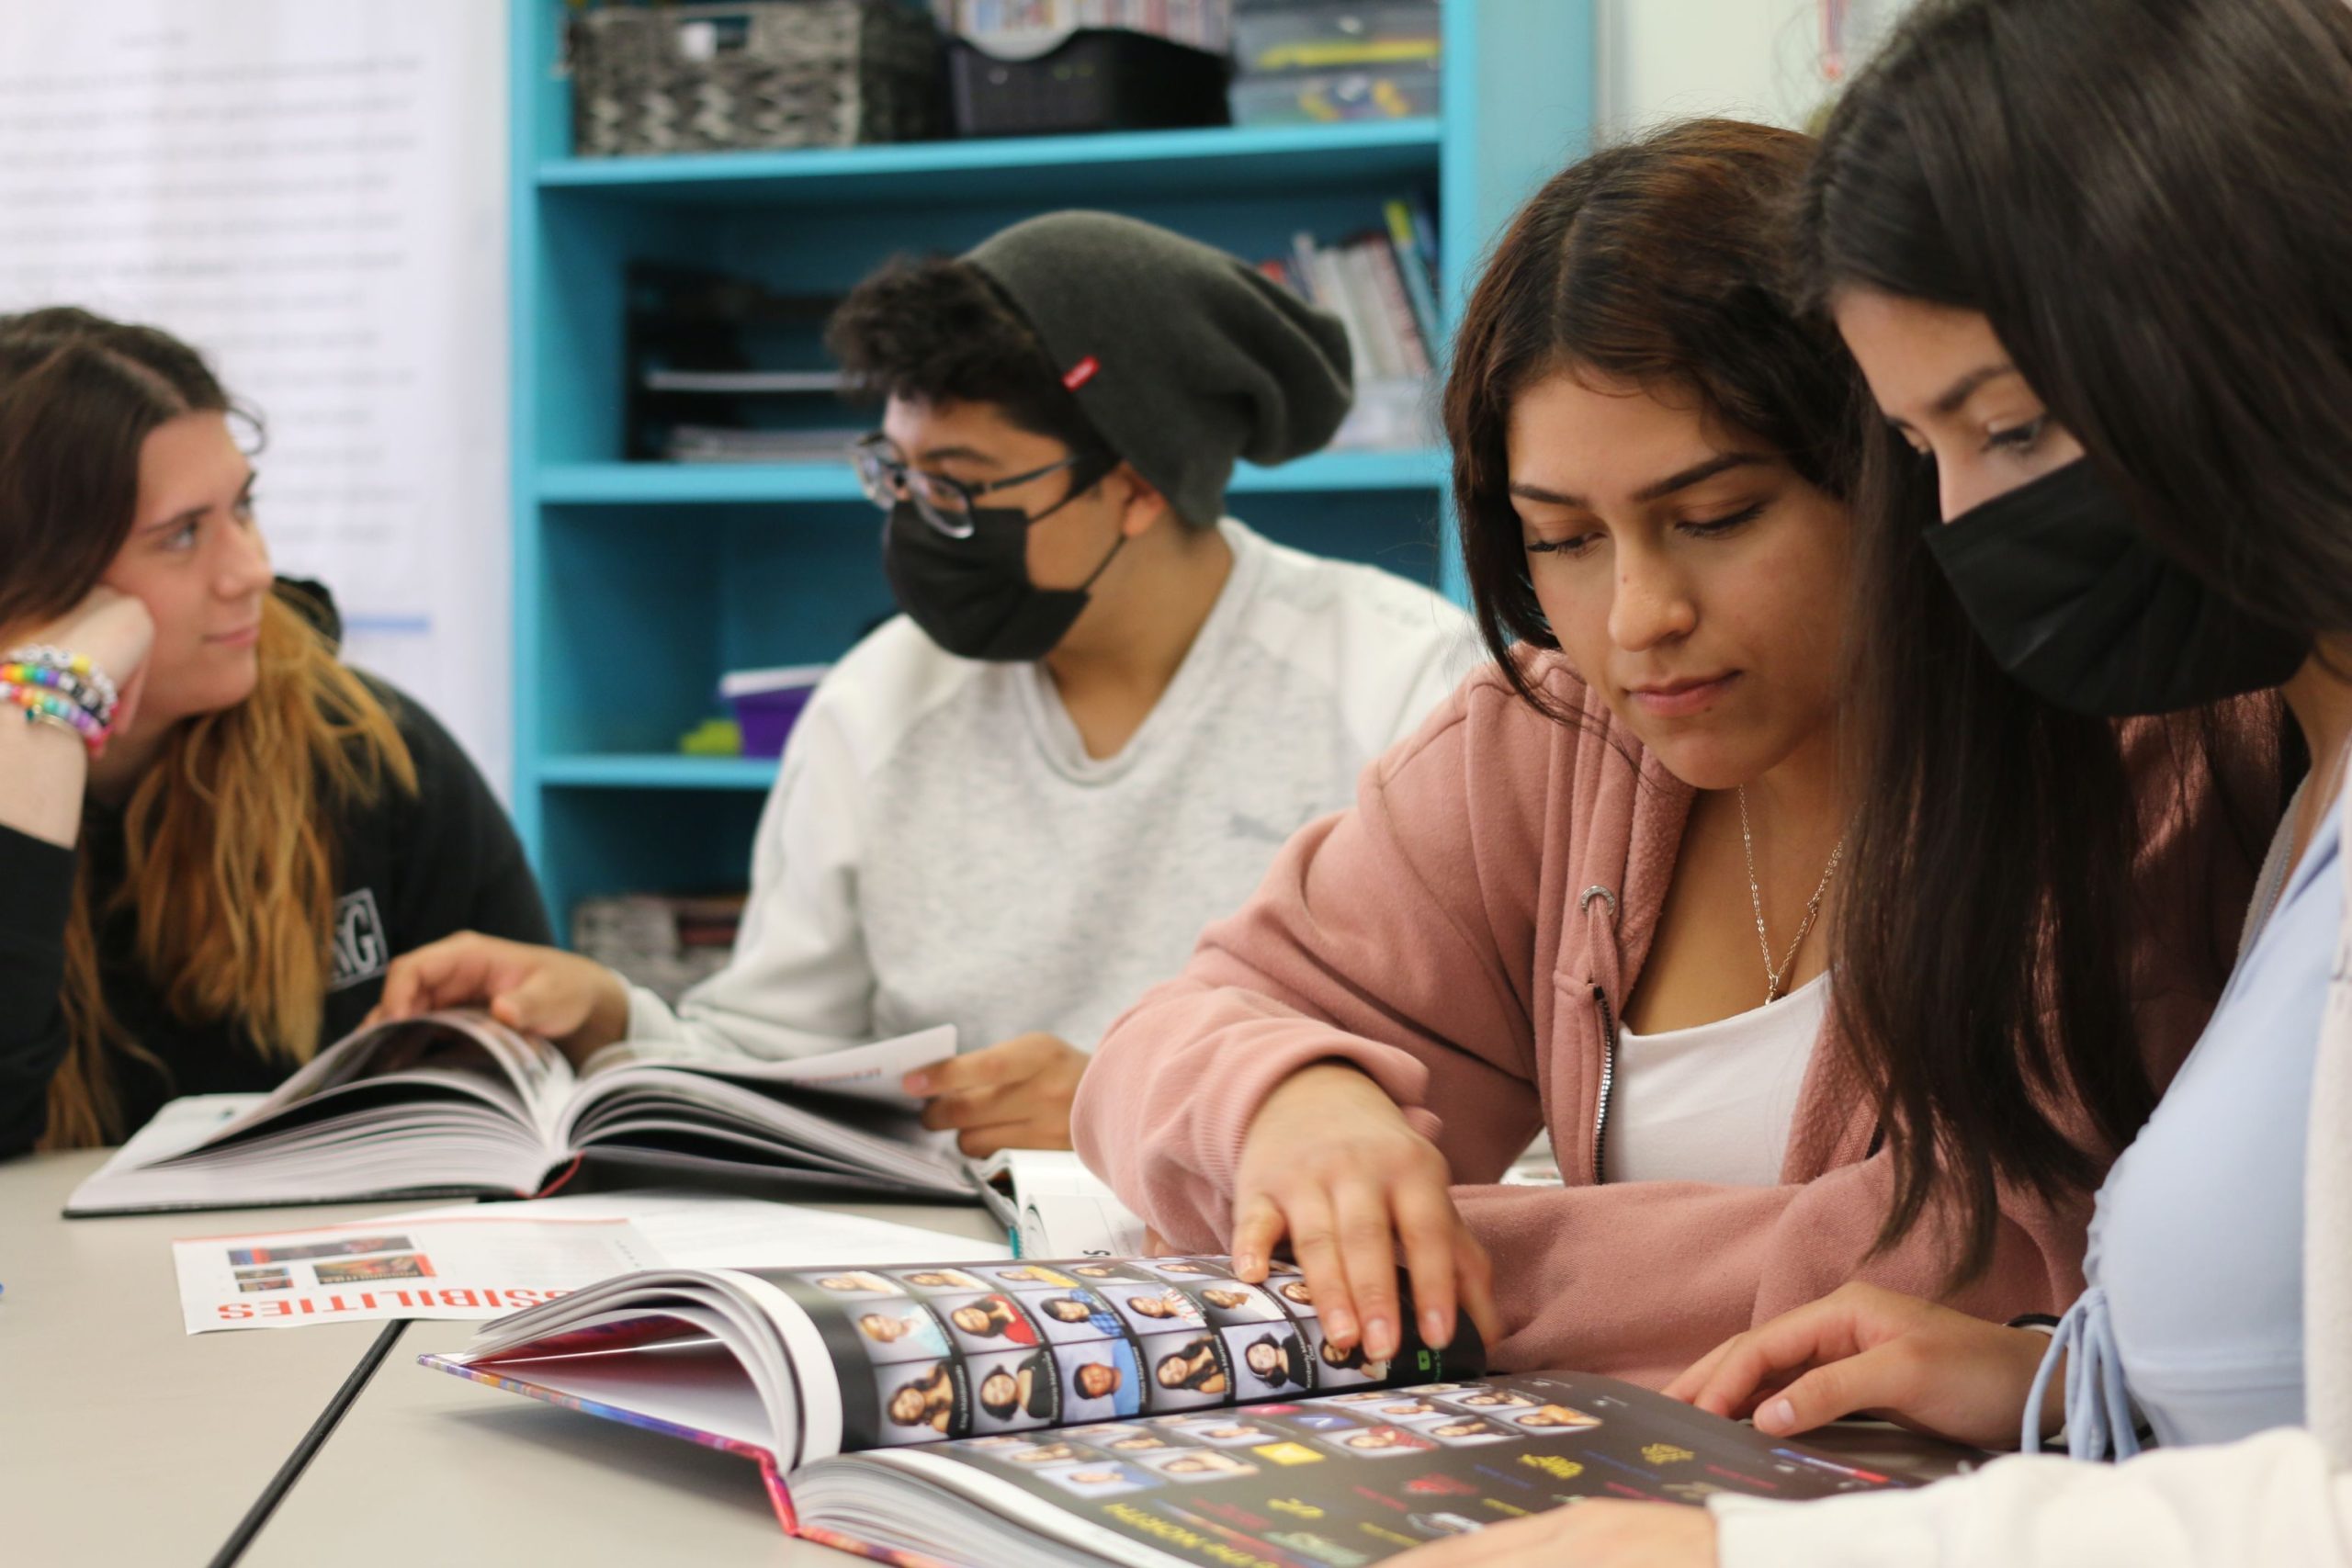 Students sitting at a table and looking at the yearbook. Some students are masked.